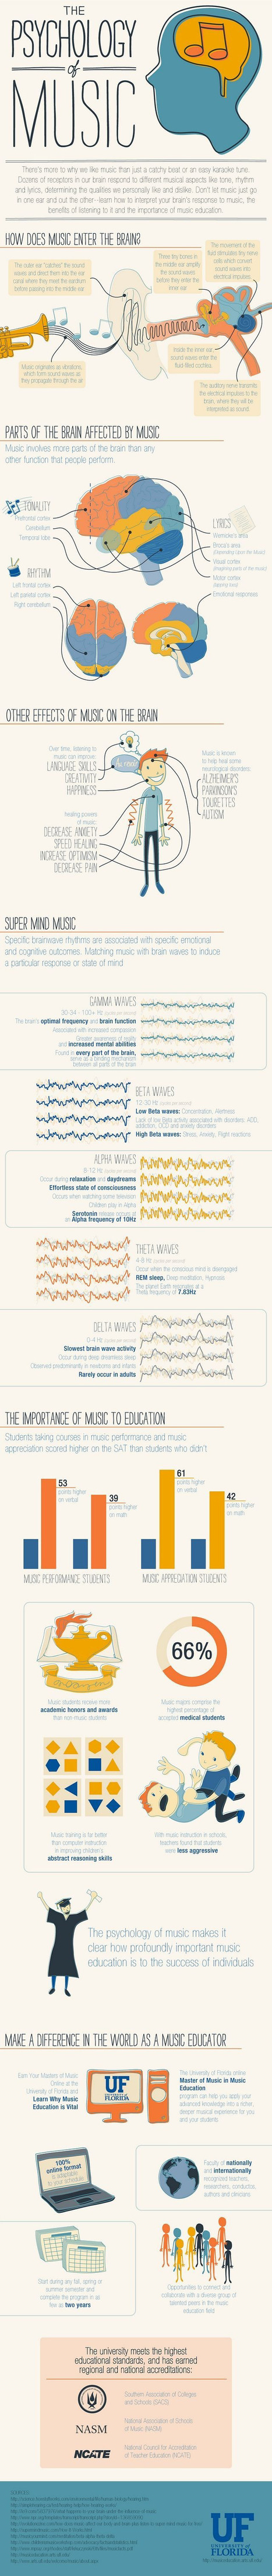 A Wonderful Graphic Featuring The Importance of Music in Education [Infographic] | gpmt | Scoop.it